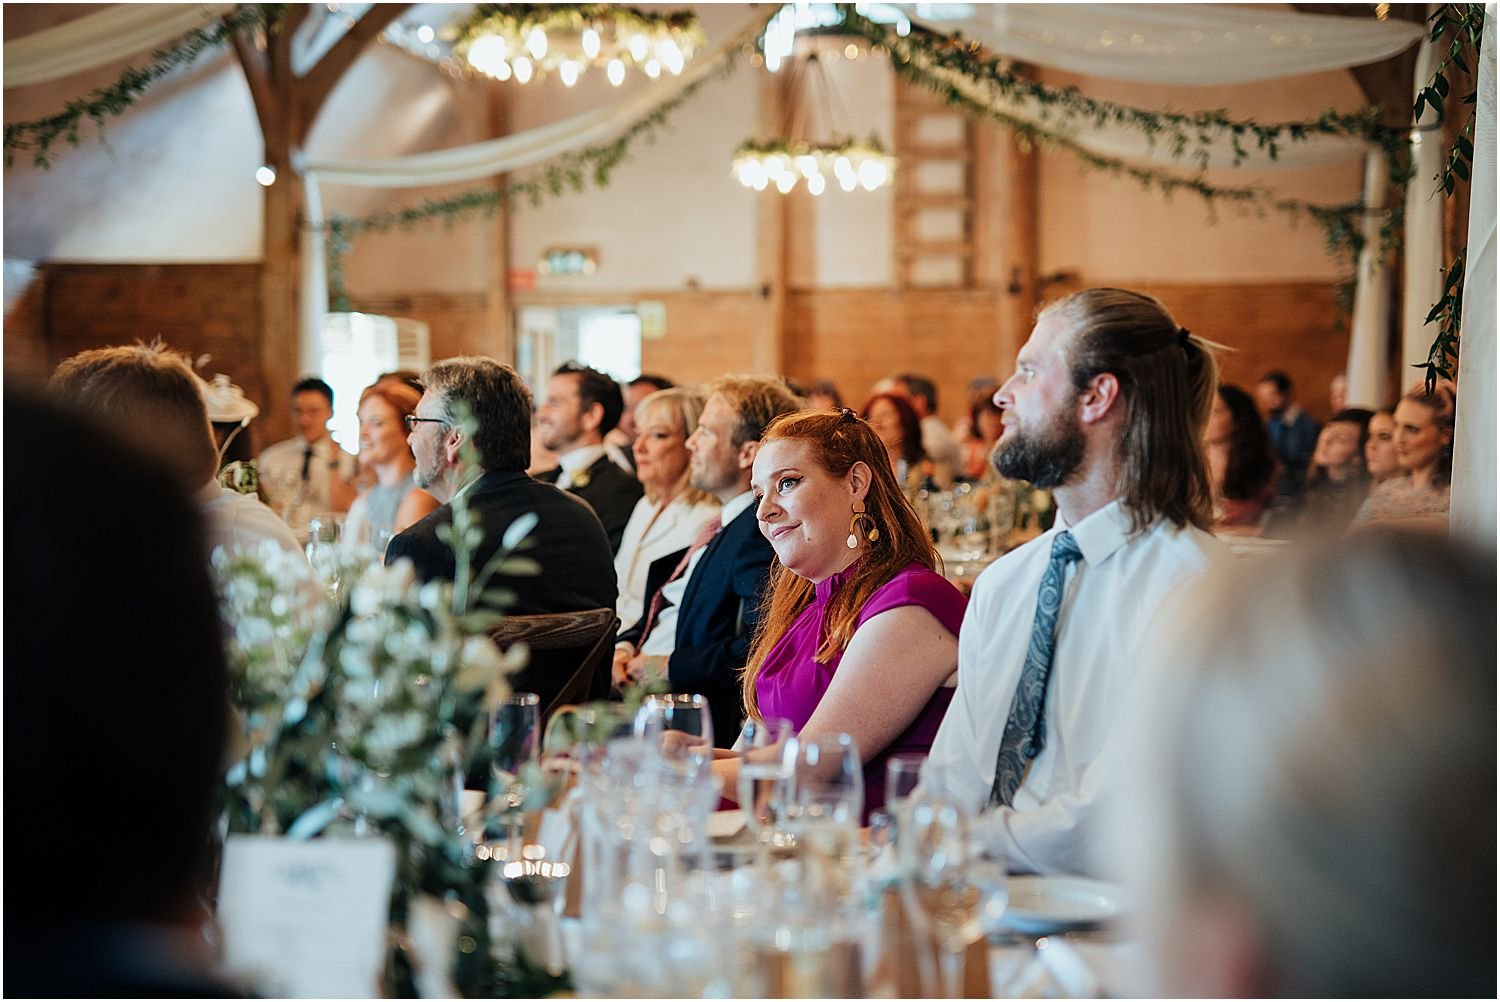 Wedding guests during speeches